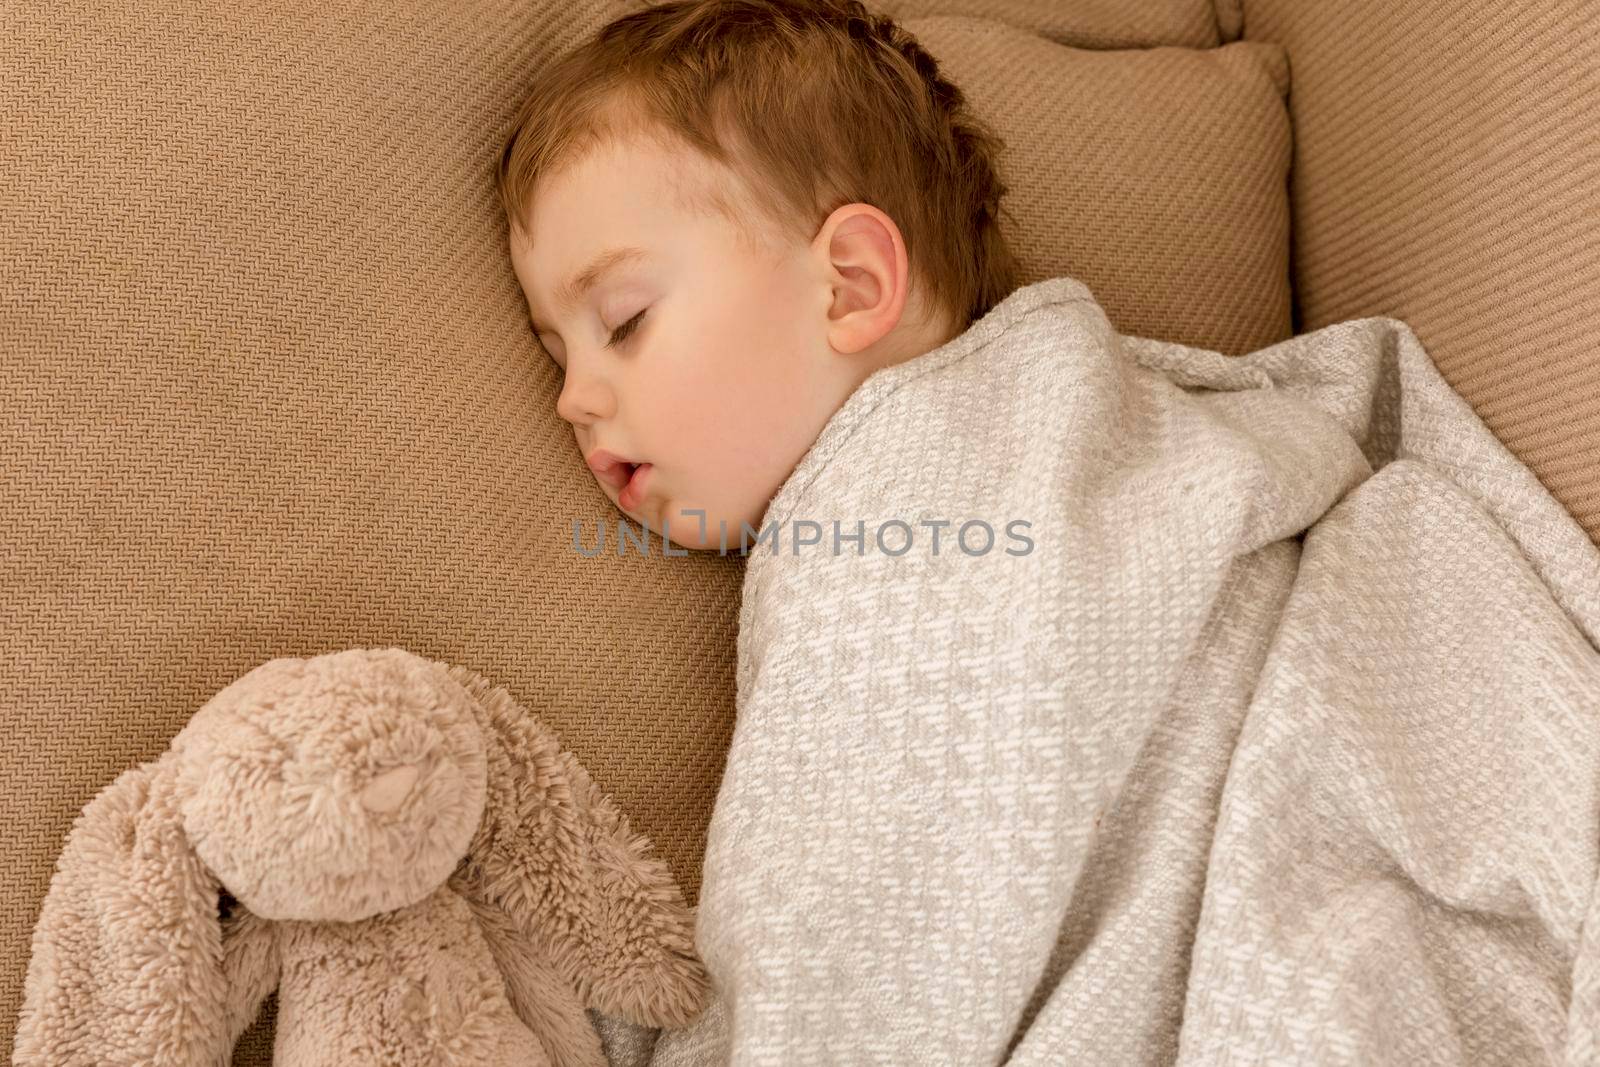 Little, cute caucasian boy sleeping on couch at home. Child taking day nap. Kid resting, relaxing with favorite fluffy toy. Sweet dreams, daily routine, healthy peaceful sleep. Cozy interior. by creativebird